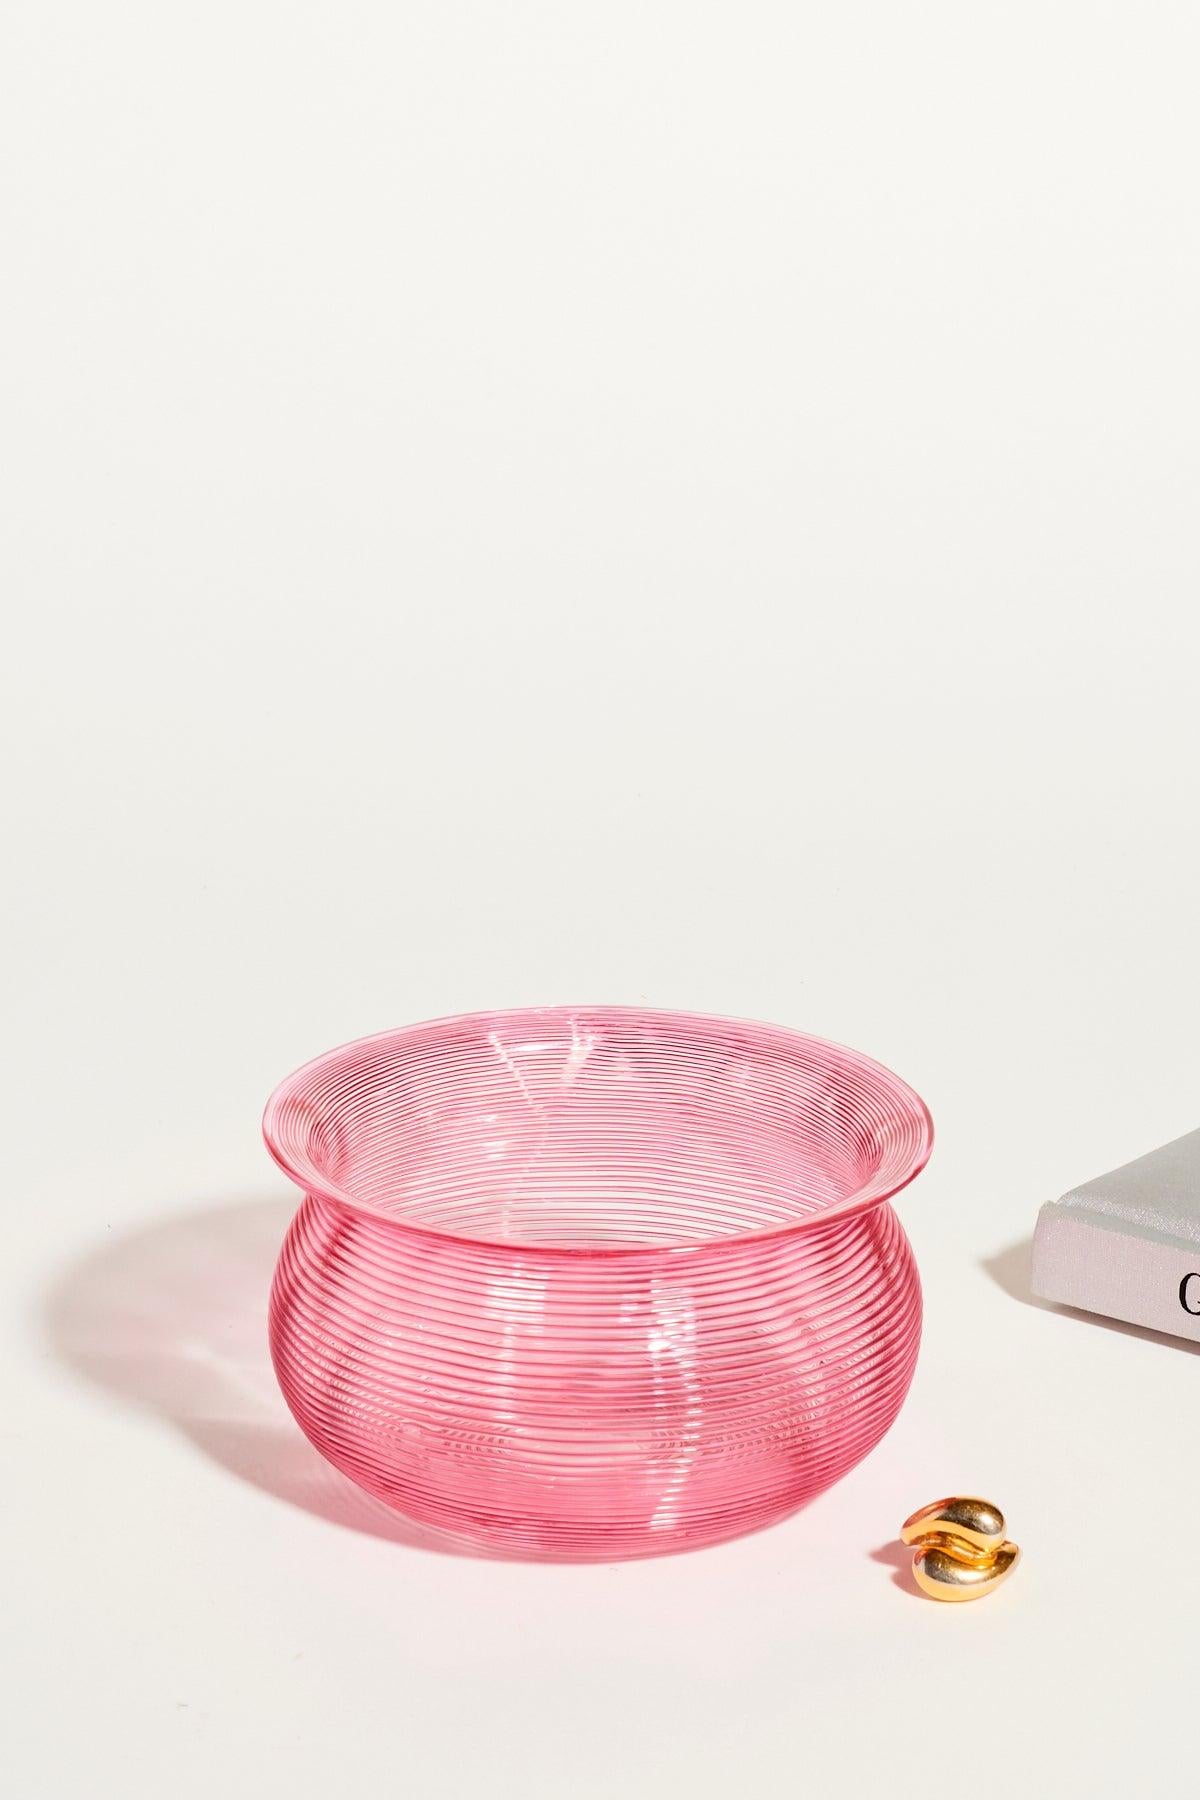 Victorian threaded glass bowl encircled with fine threads of rose pink glass.